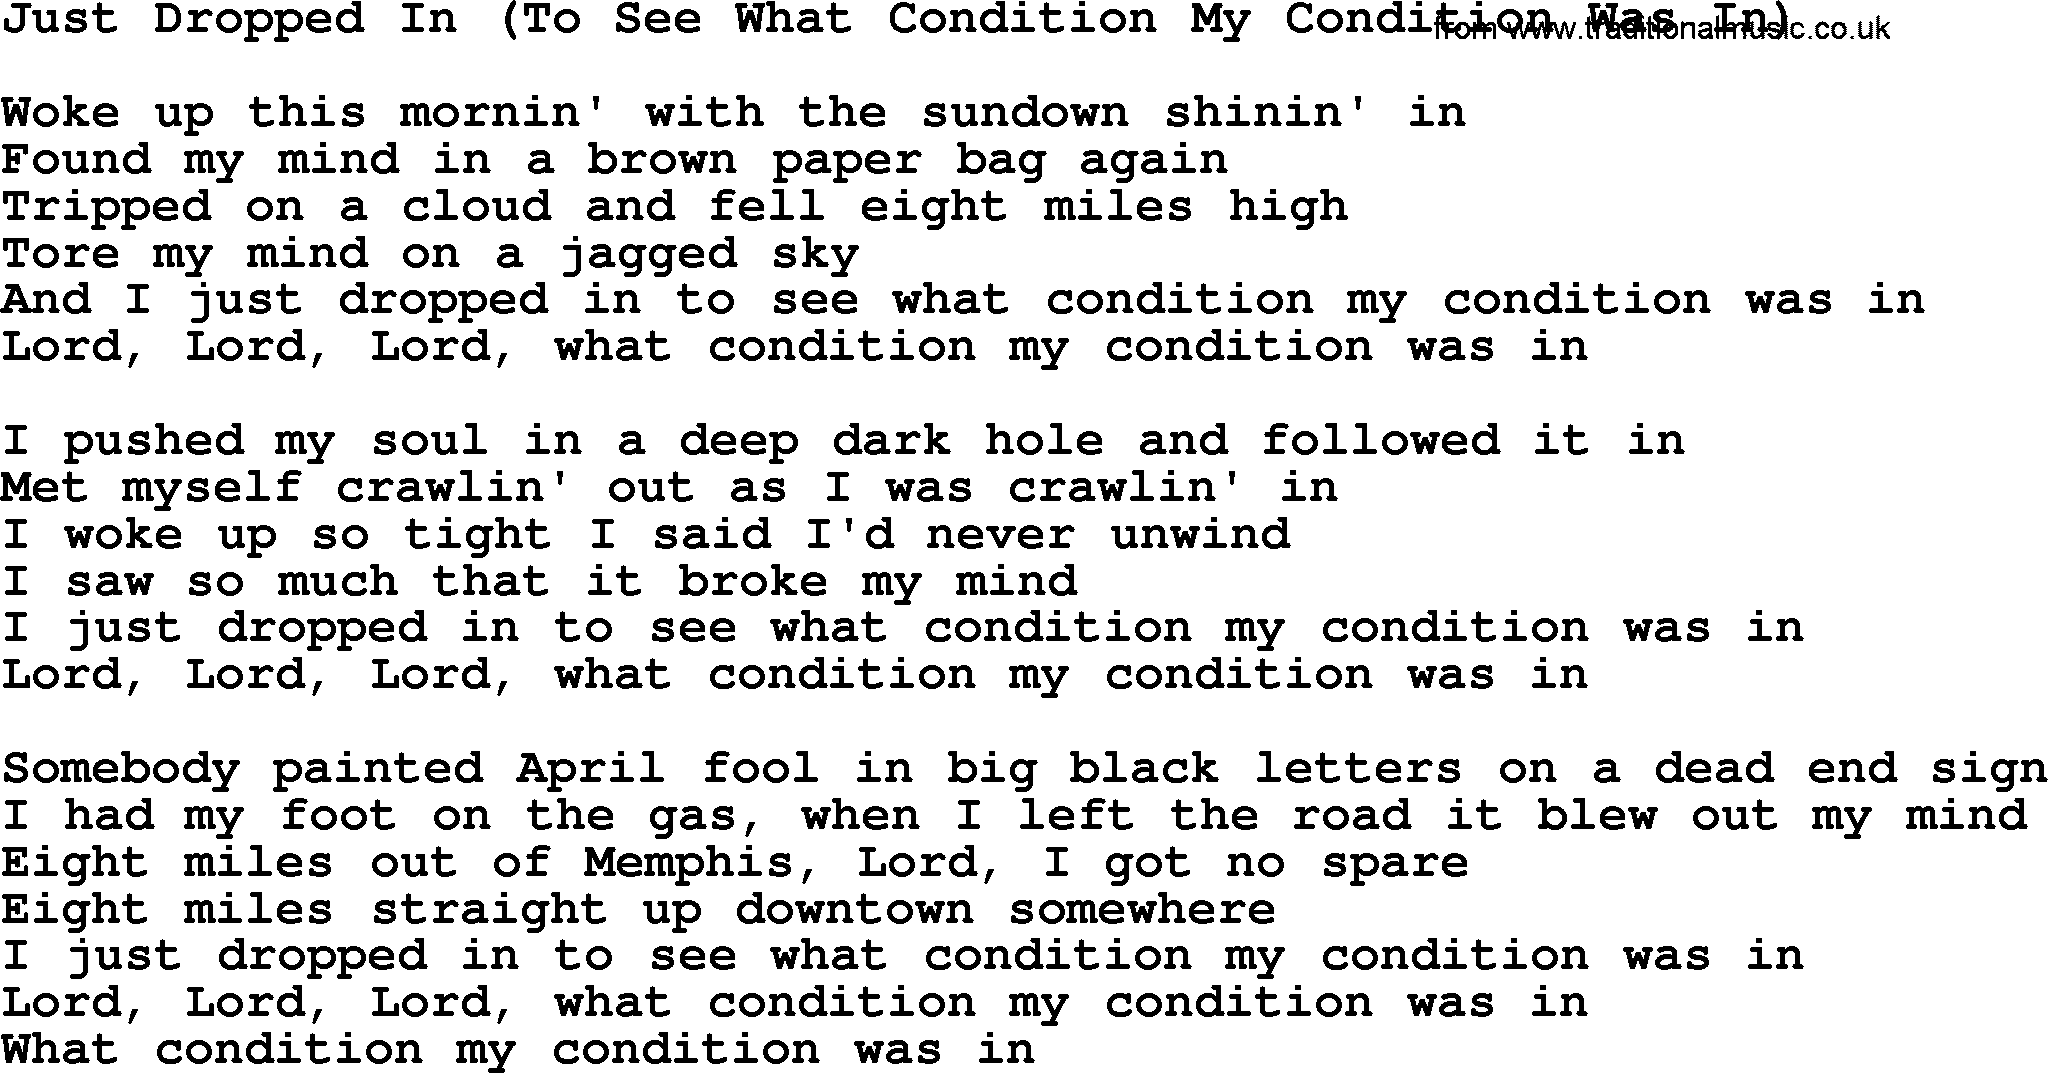 Willie Nelson song: Just Dropped In (To See What Condition My Condition Was In) lyrics